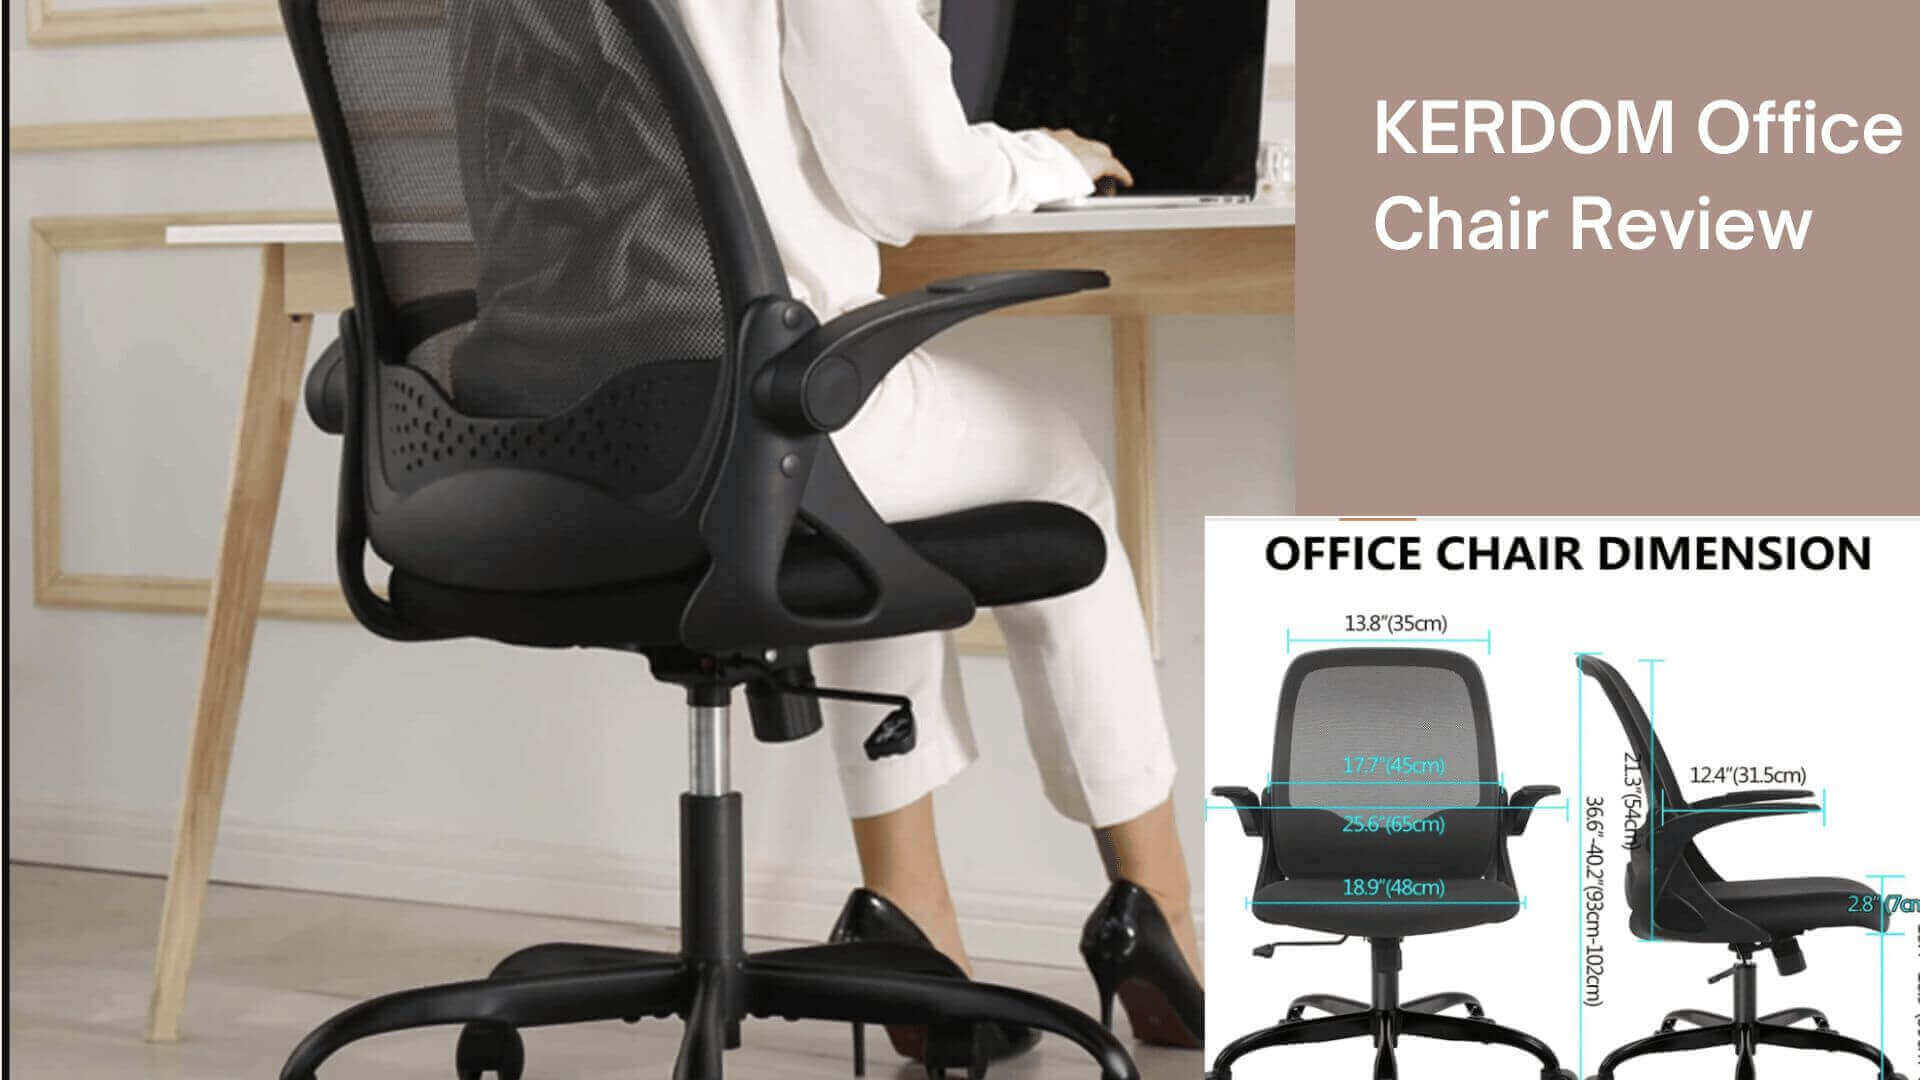 KERDOM Office Chair review